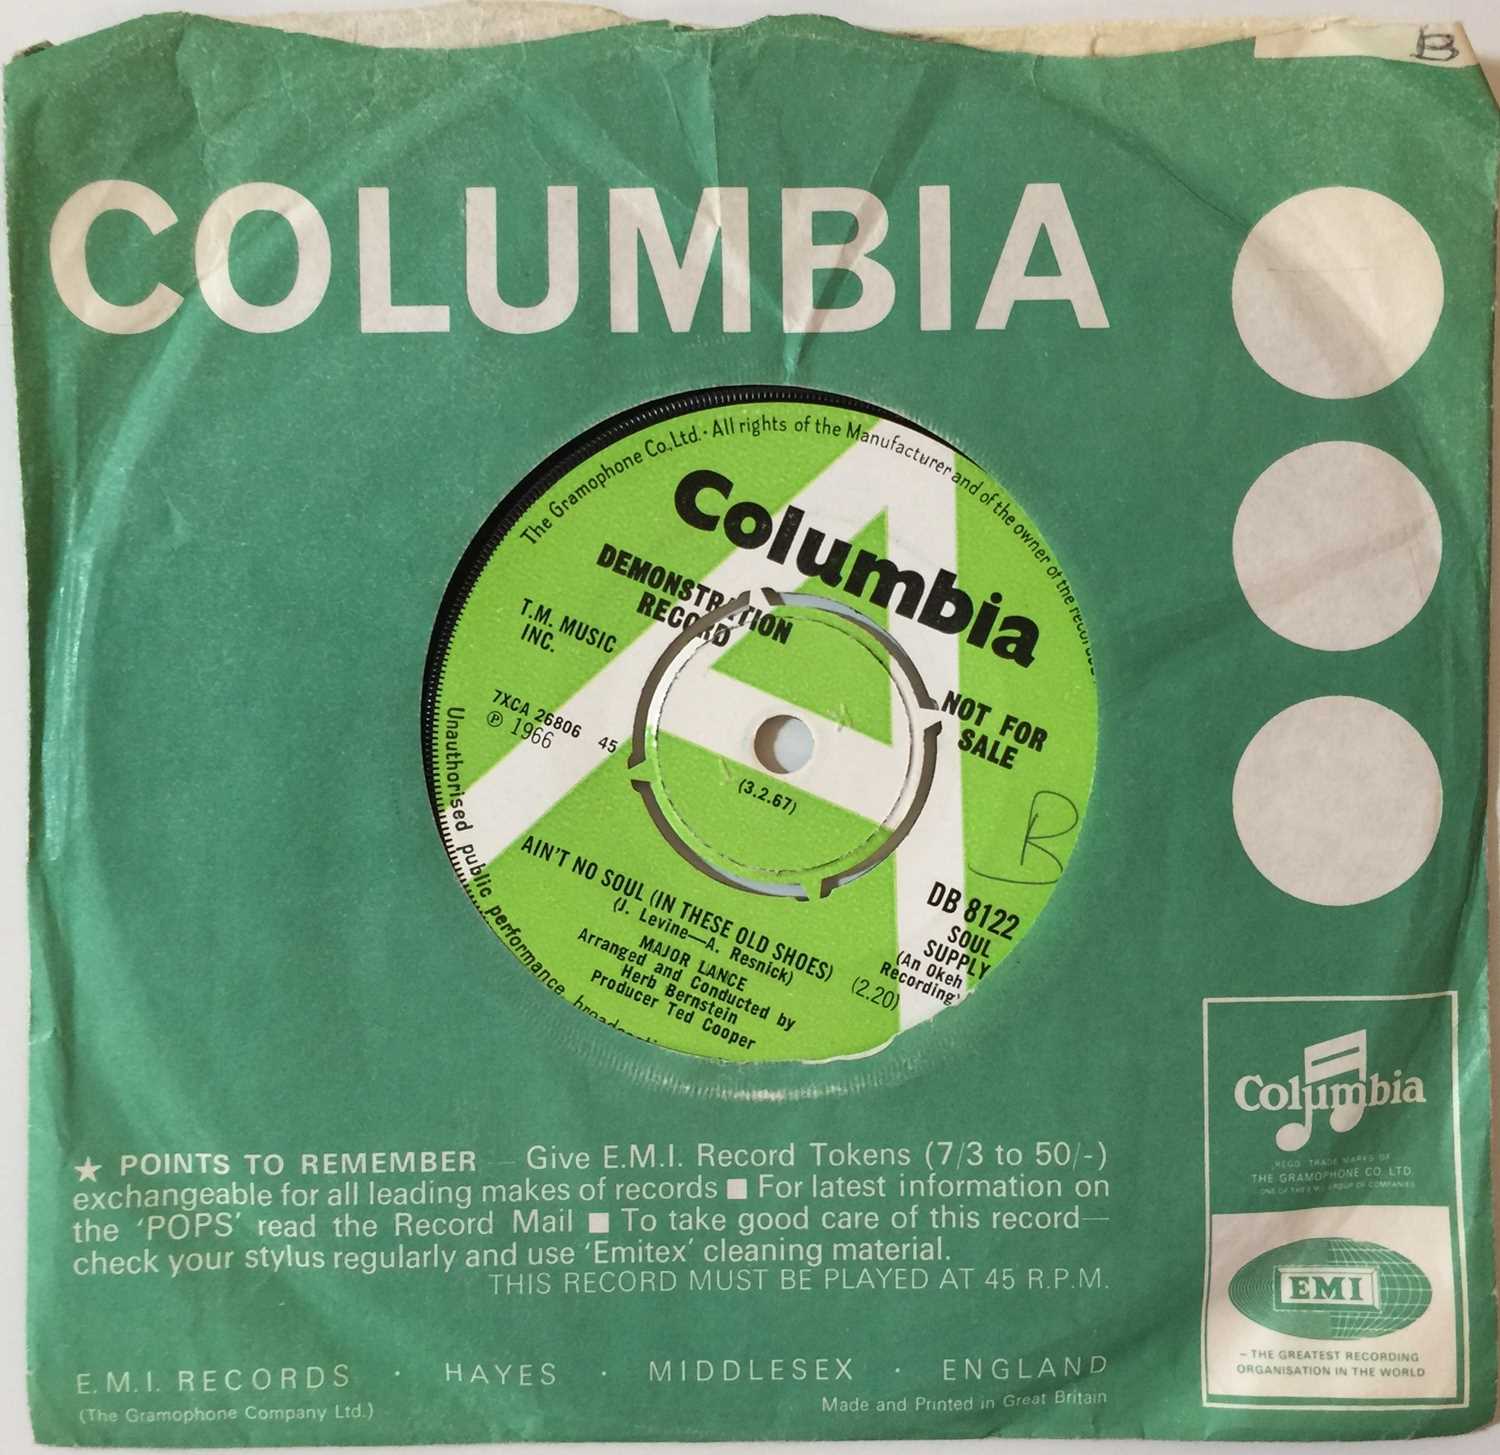 Lot 1 - MAJOR LANCE - AIN'T NO SOUL (IN THESE SHOES) 7" (ORIGINAL UK DEMO - COLUMBIA DB 8122)